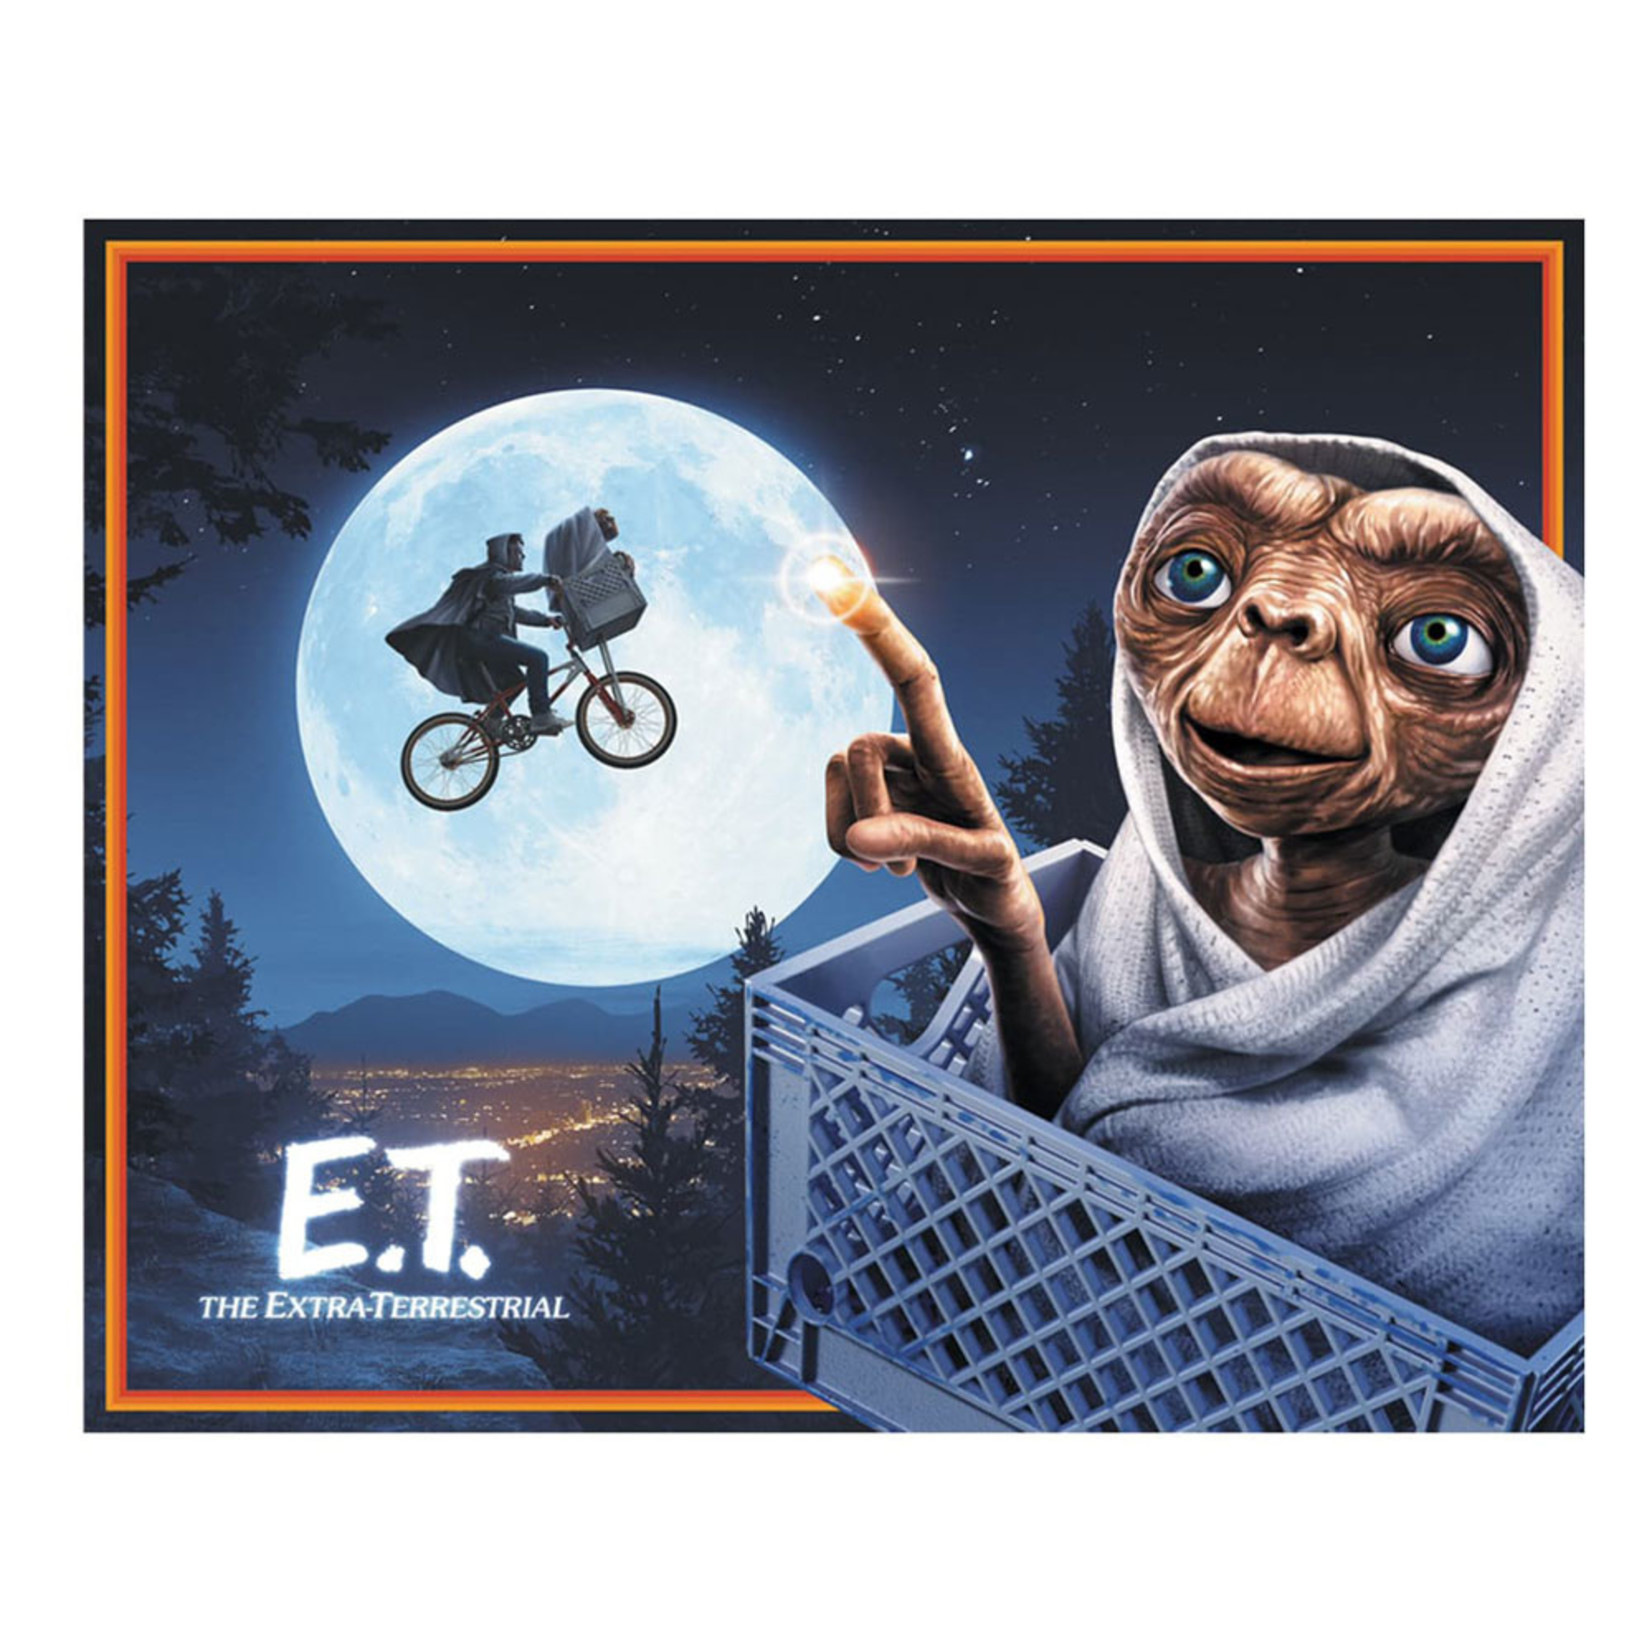 The Noble Collection The Noble Collection E.T The Extra Terrestrial Over The Moon Puzzle 1000 pc